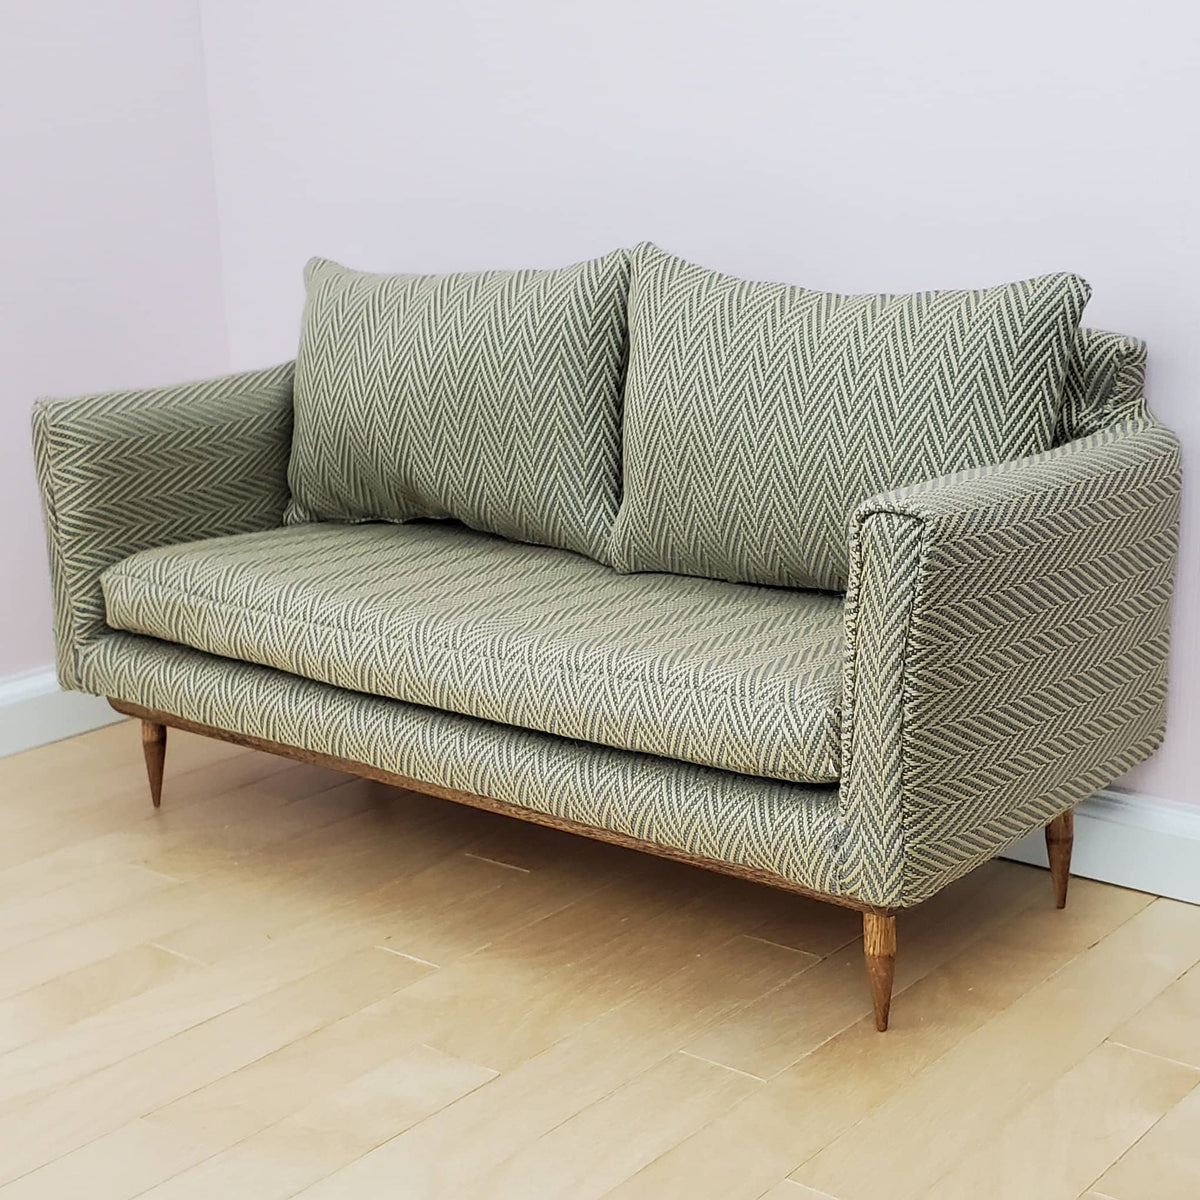 Upholstered Couch for 1:6 Scale Fashion Doll - Mid-Century Modern